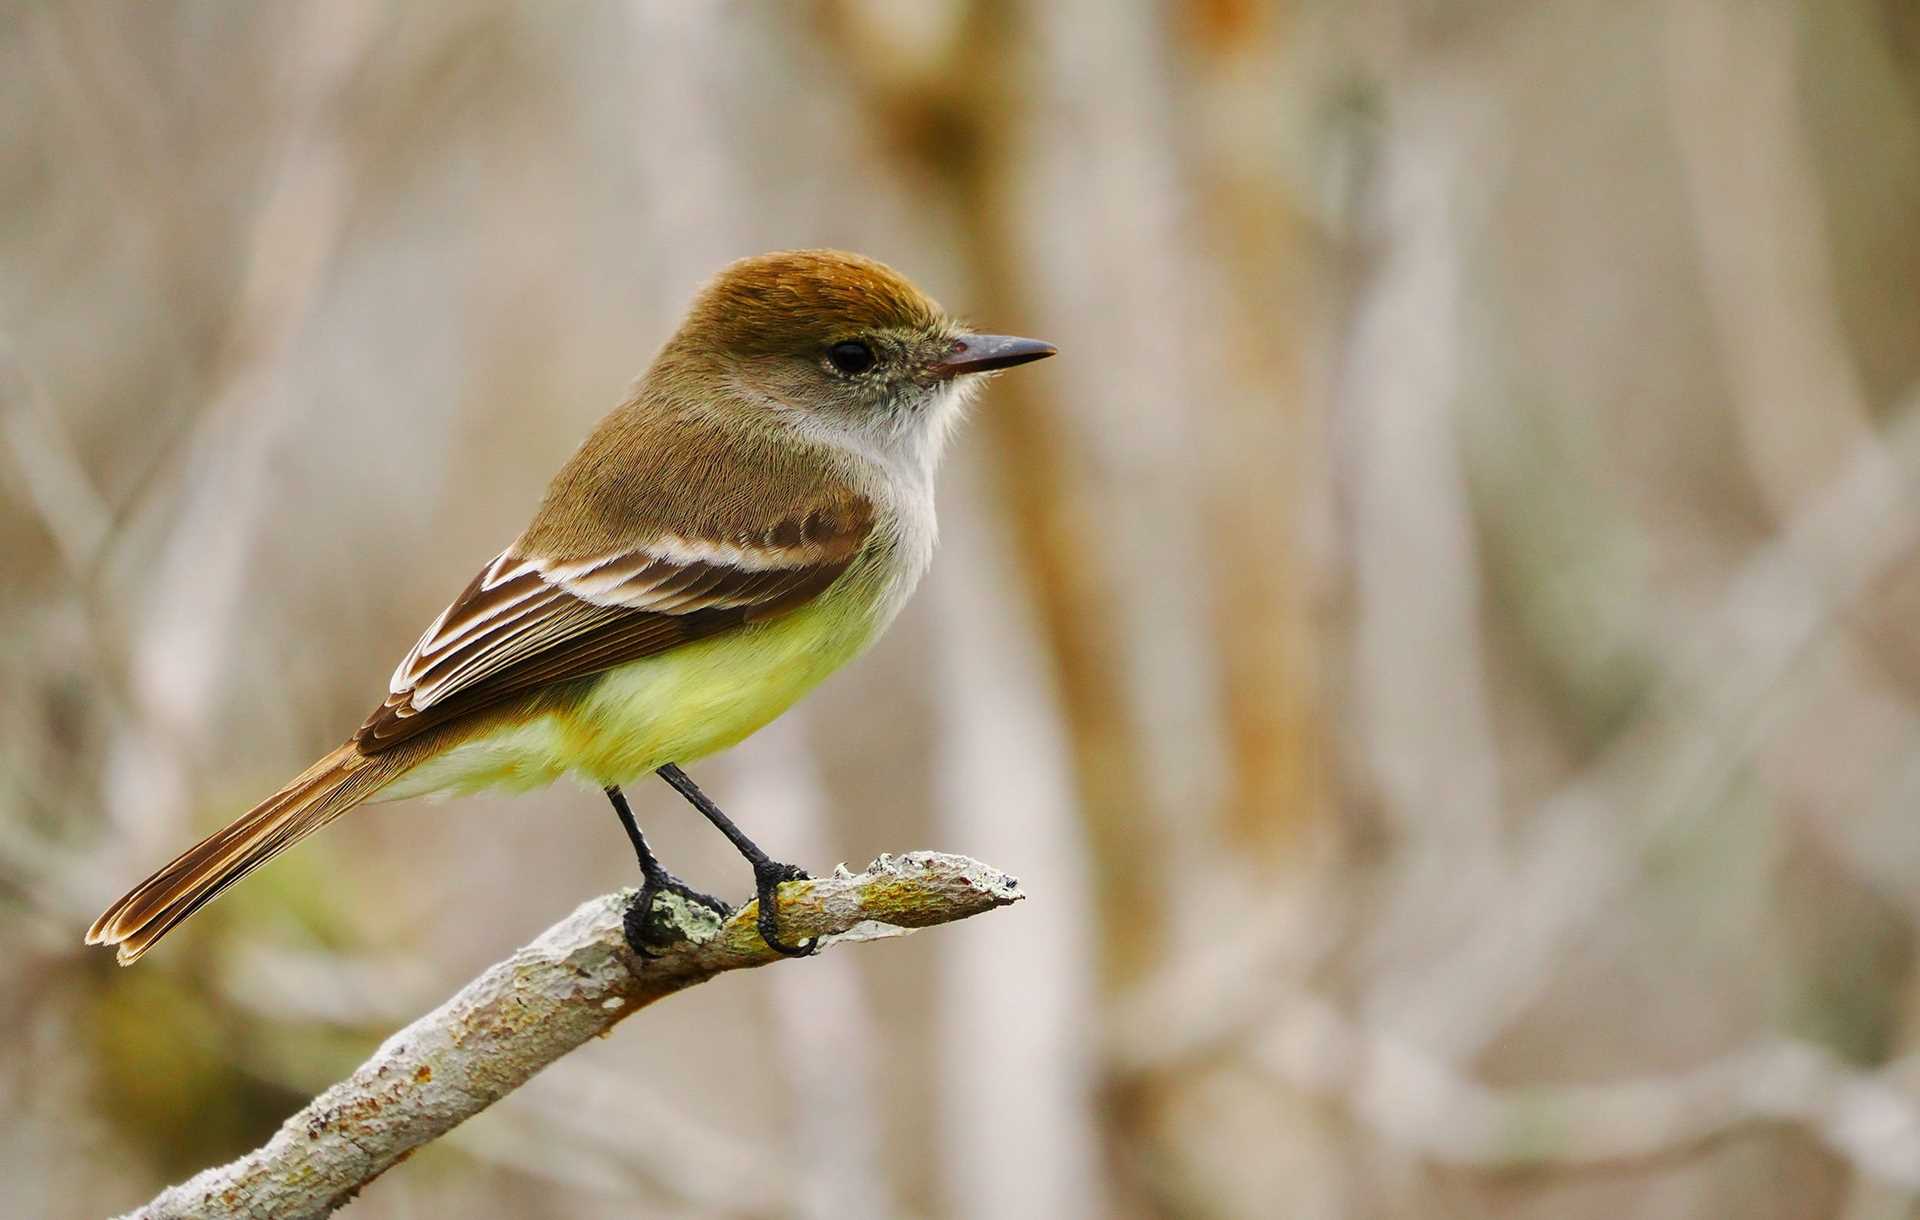 galapagos flycatcher perched on a branch